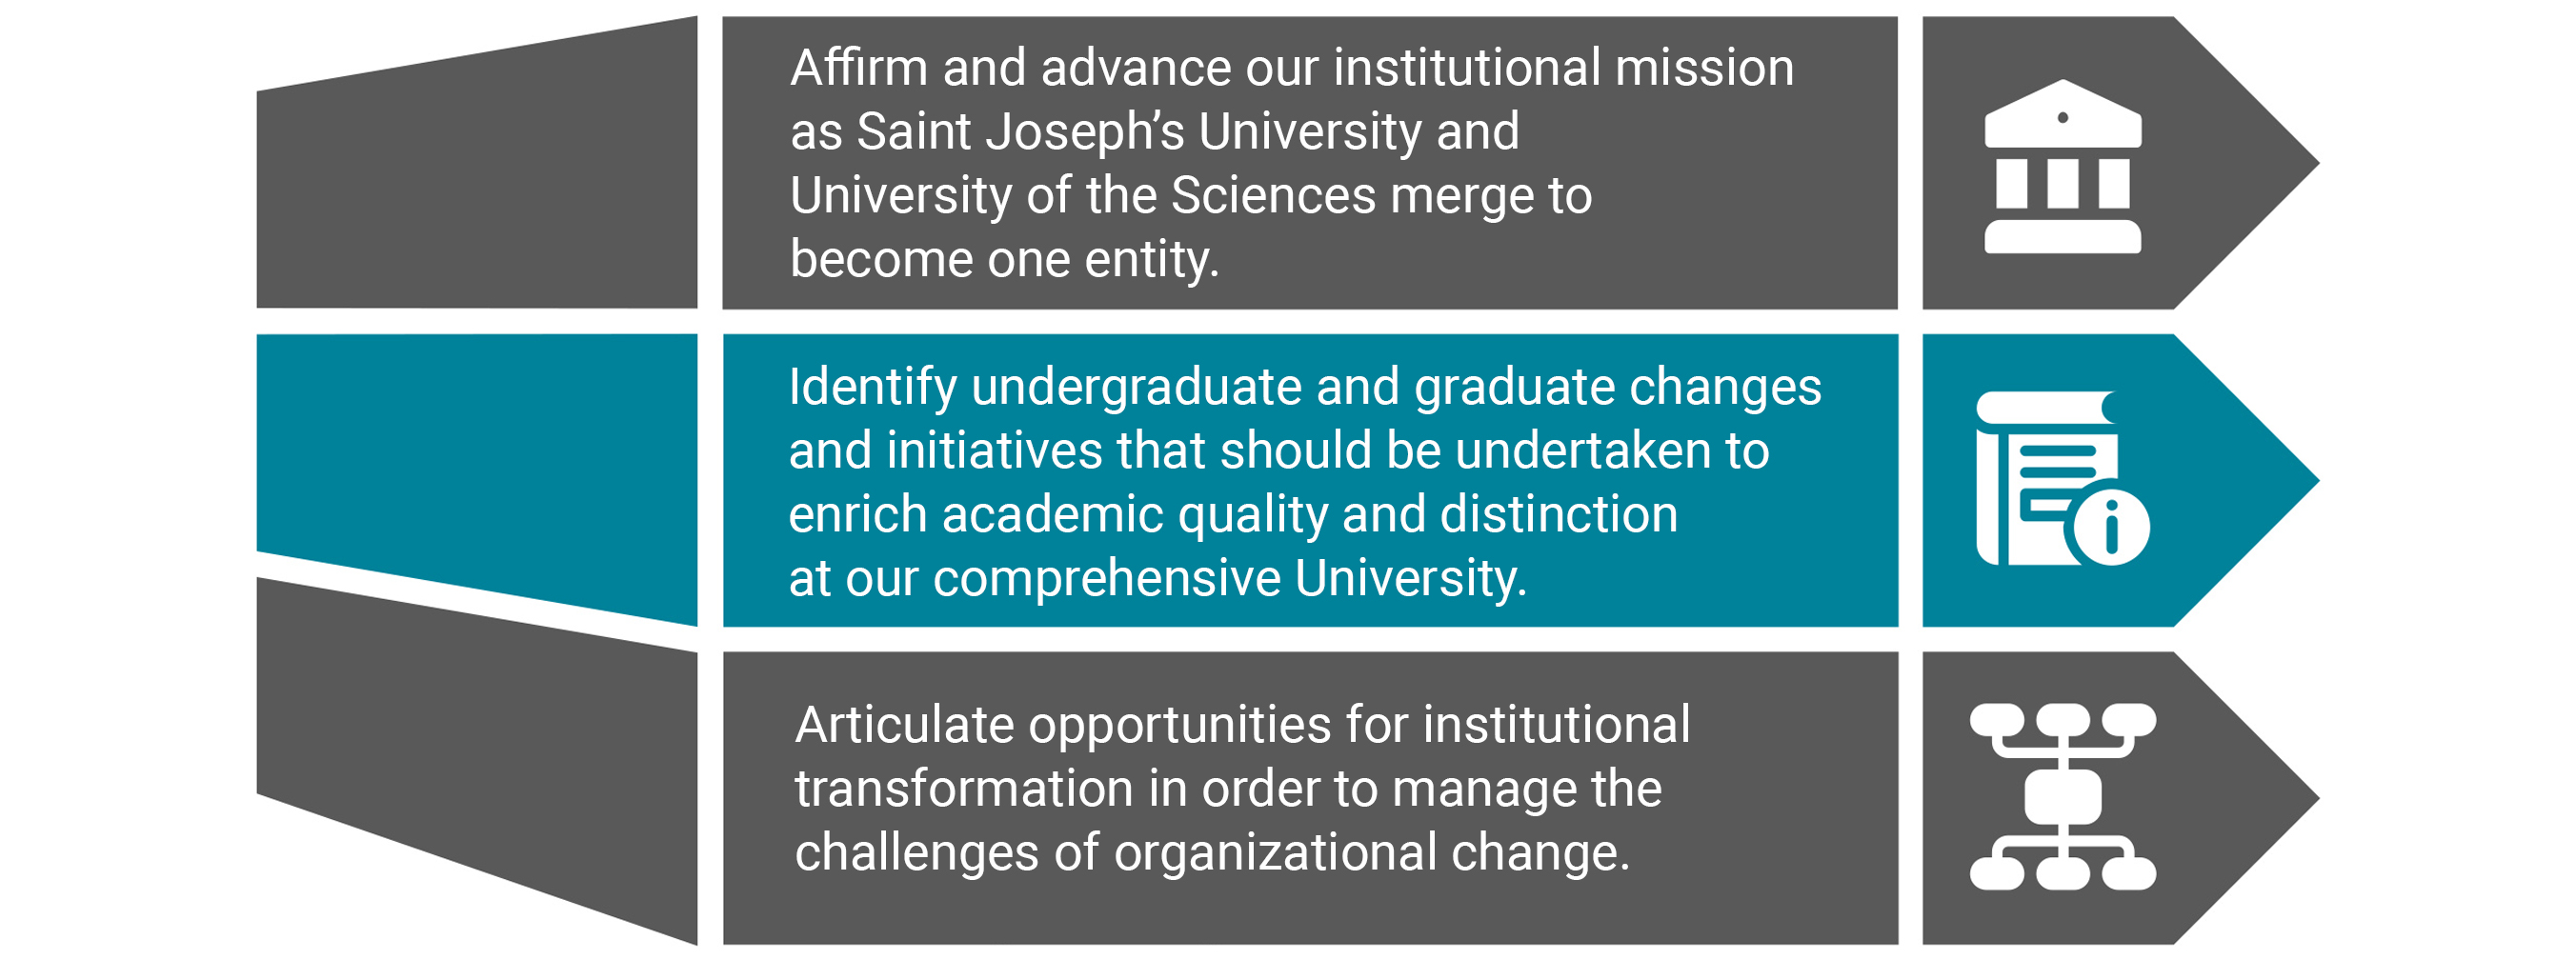 Graphic with this information: Affirm and advance our institutional mission as Saint Joseph’s University and the University of the Sciences merge to become one entity. Identify undergraduate and graduate changes and initiatives that should be undertaken to enrich academic quality and distinction at our comprehensive University. Articulate opportunities for institutional transformation in order to manage the challenges of organizational change.